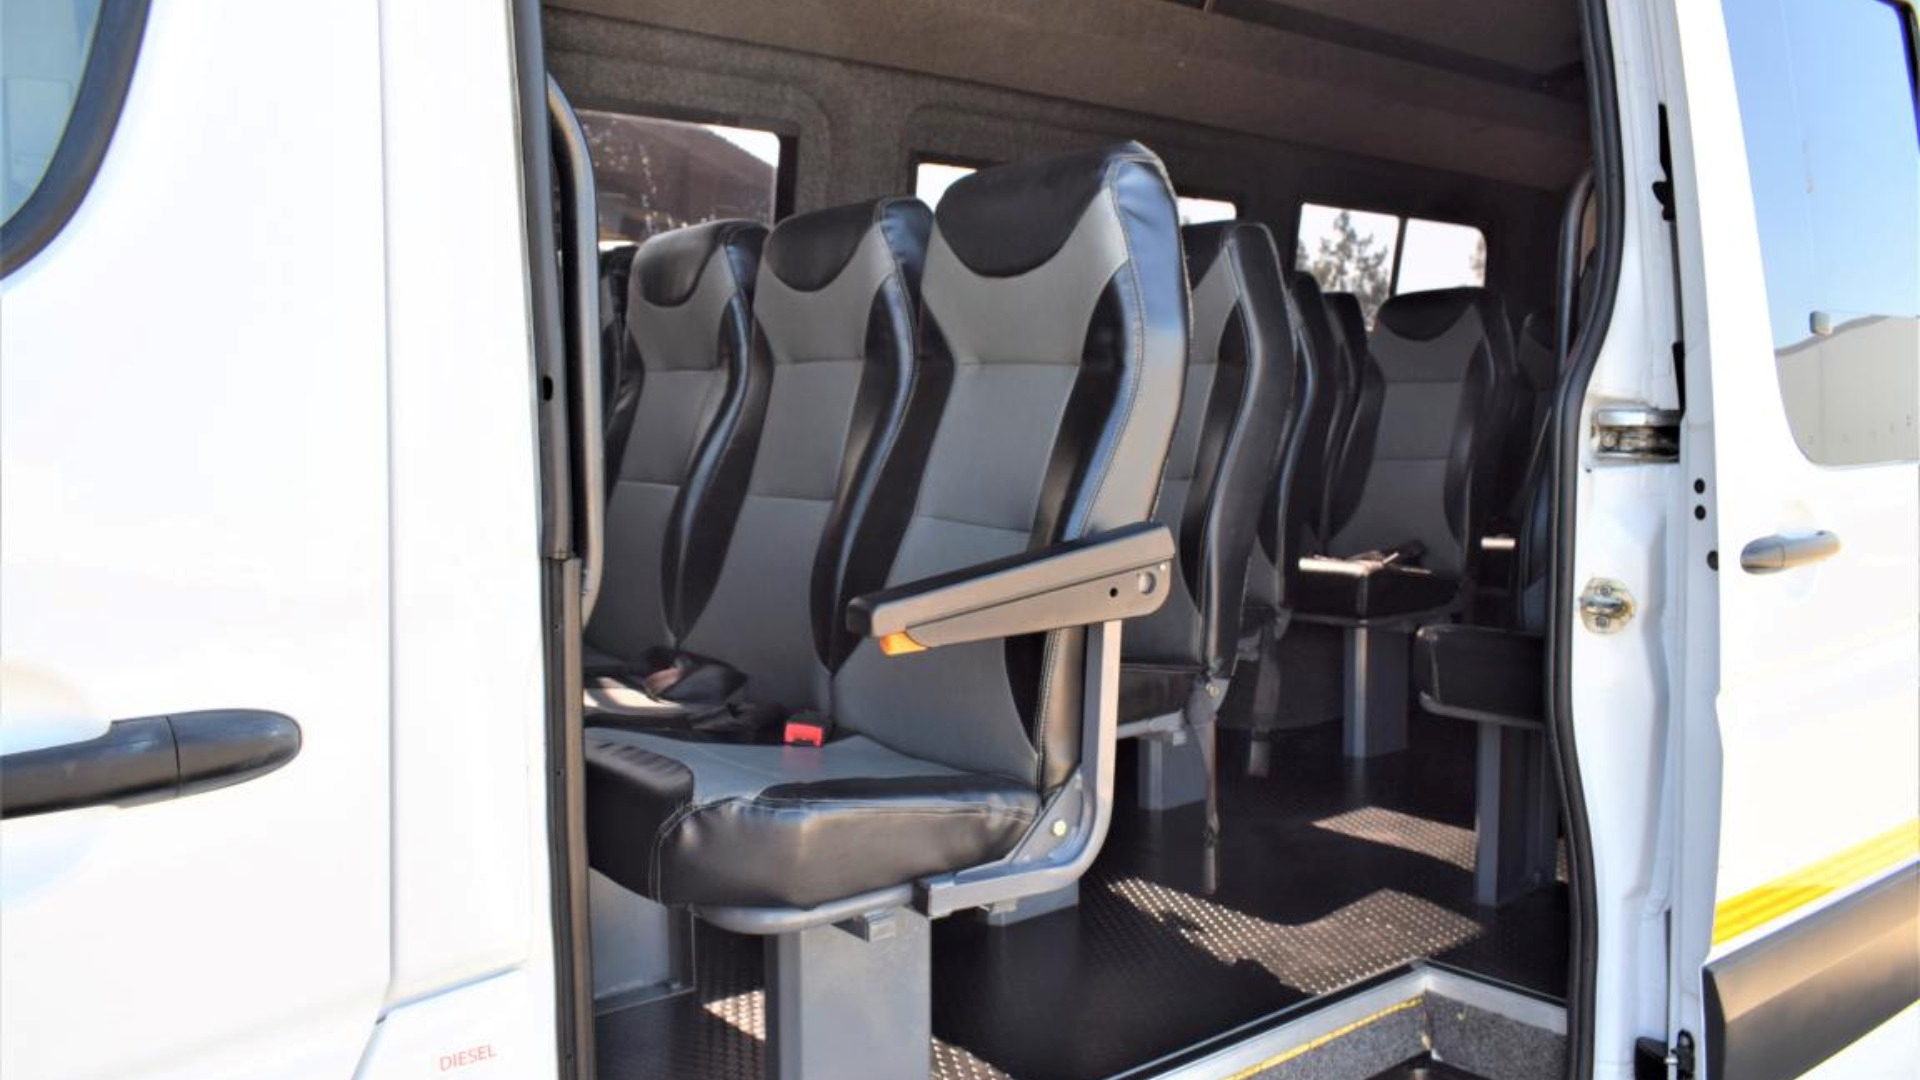 Mercedes Benz Buses 23 seater Sprinter 515CDi 23 Seats 2018 for sale by Pristine Motors Trucks | Truck & Trailer Marketplaces